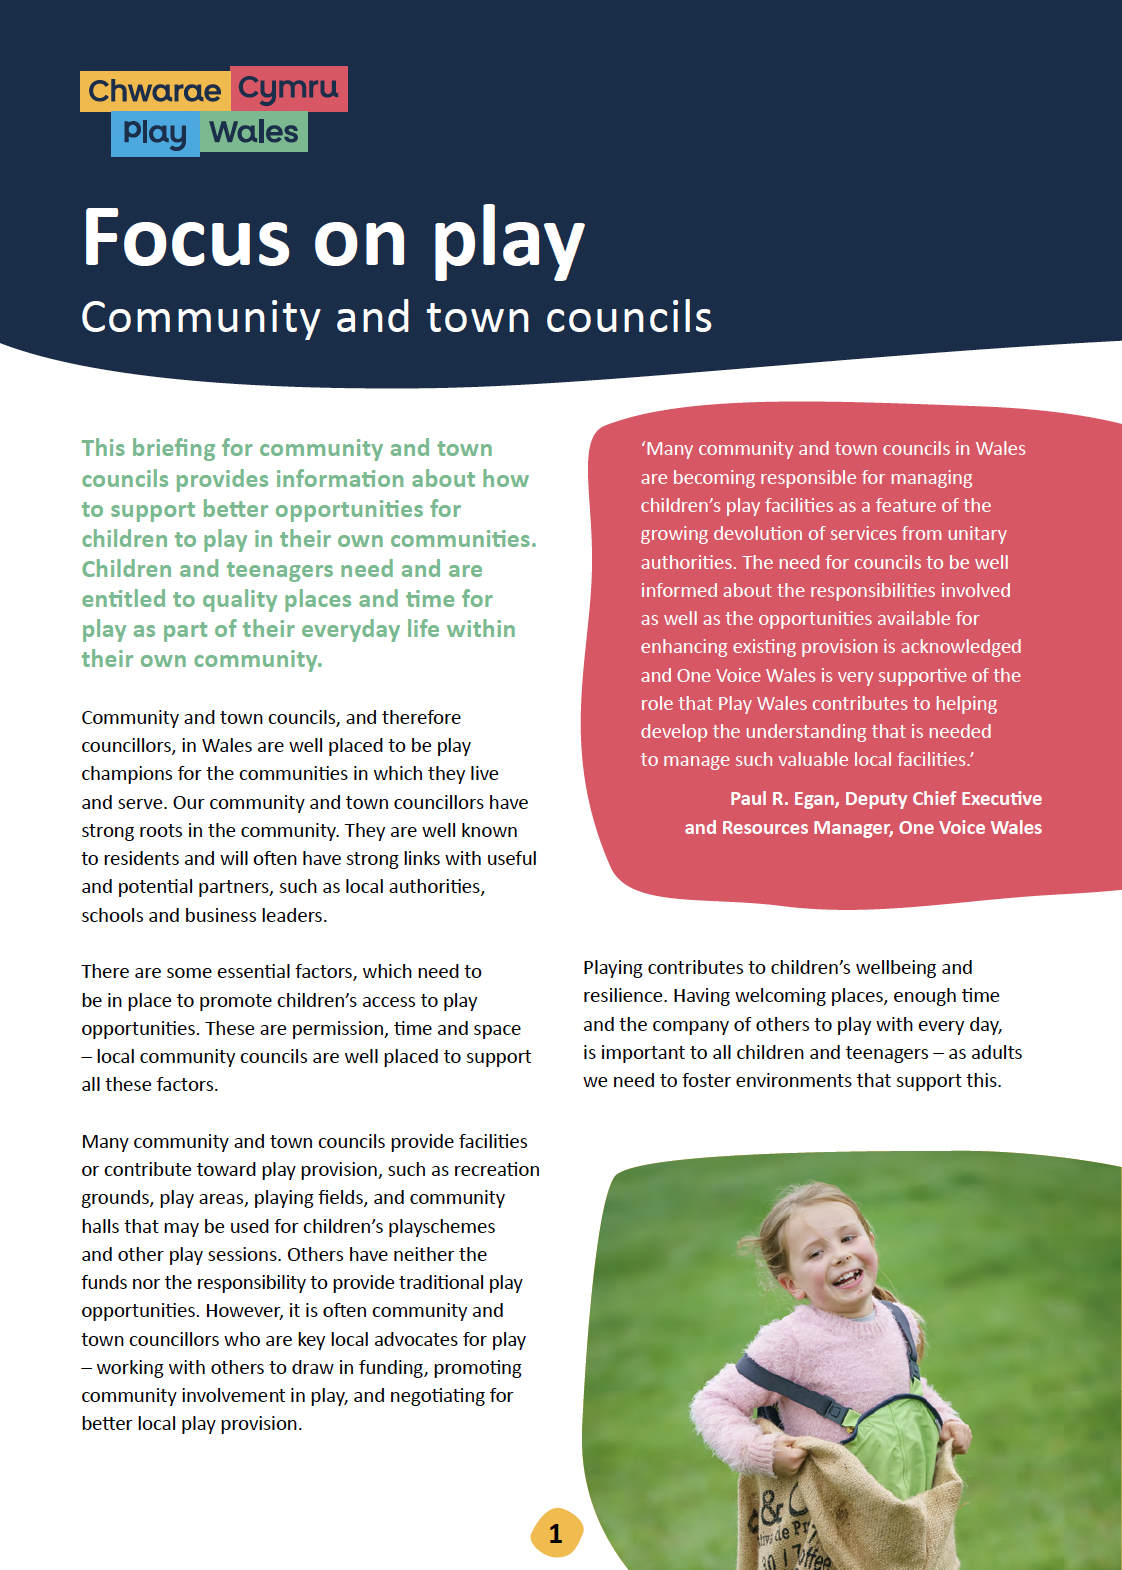 Focus on play – Community and town councils